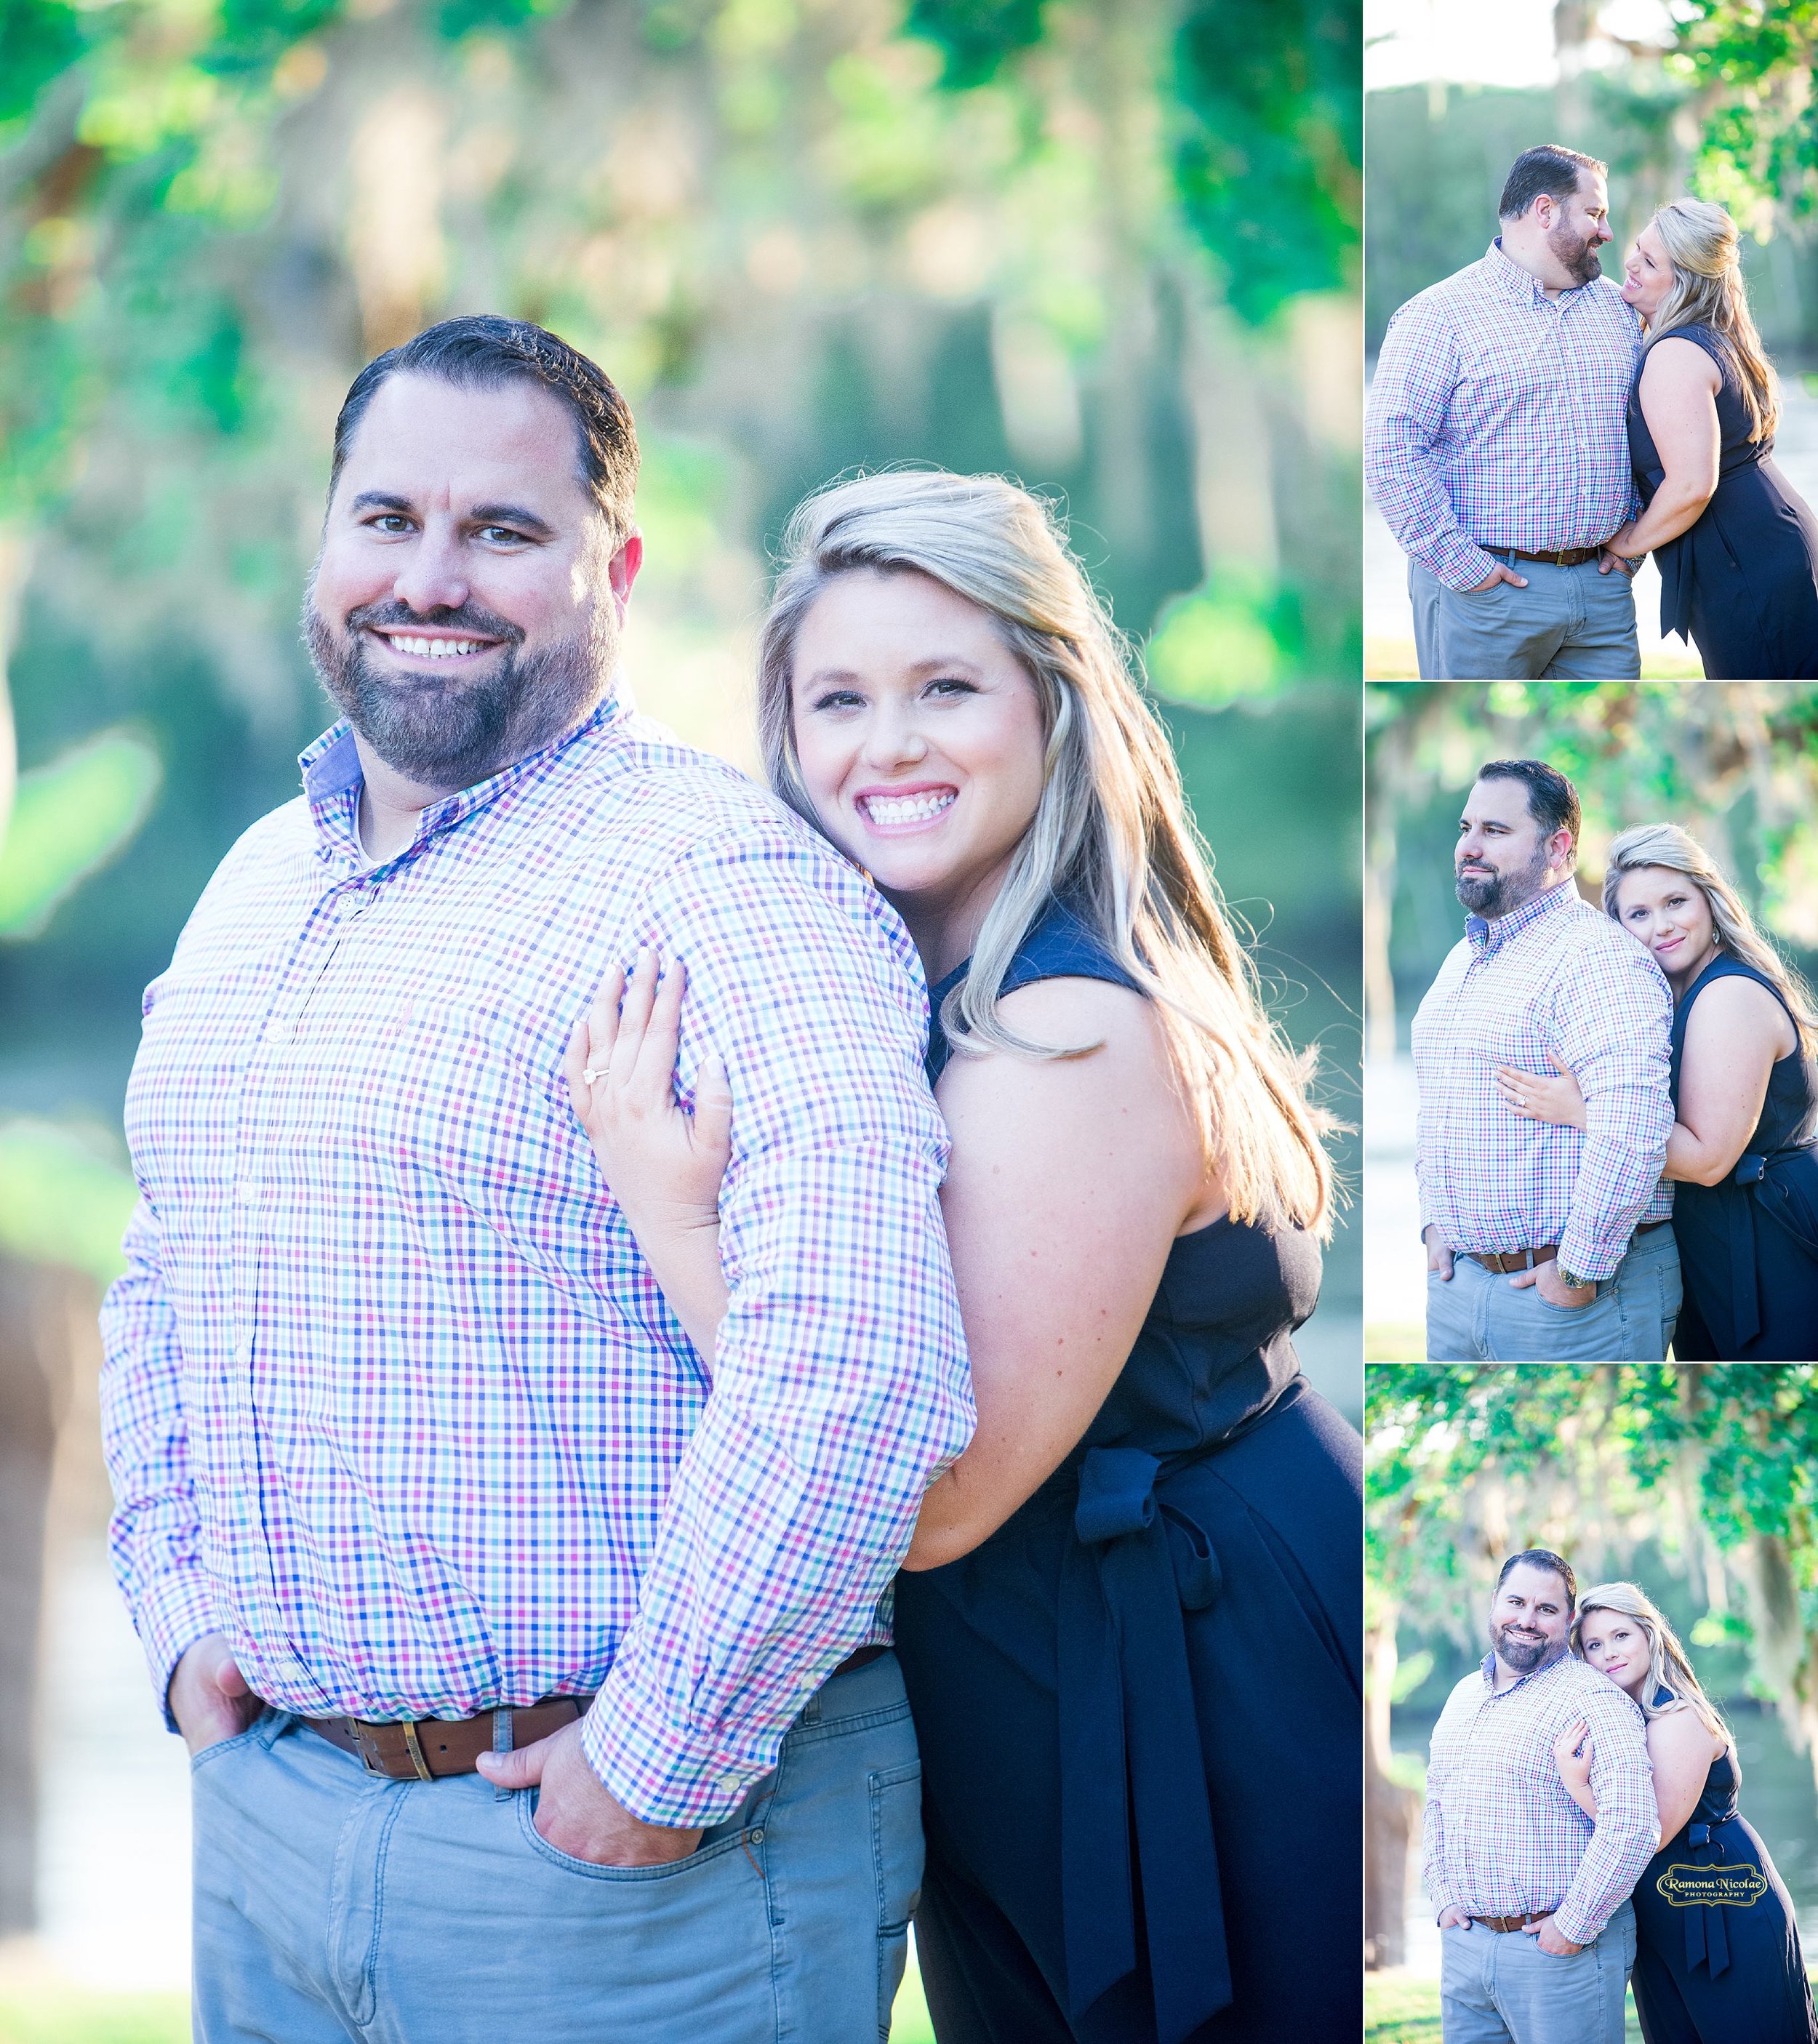 tight close hug of couple photographed by ramona nicolae in murrells inlet for engagement session.jpg